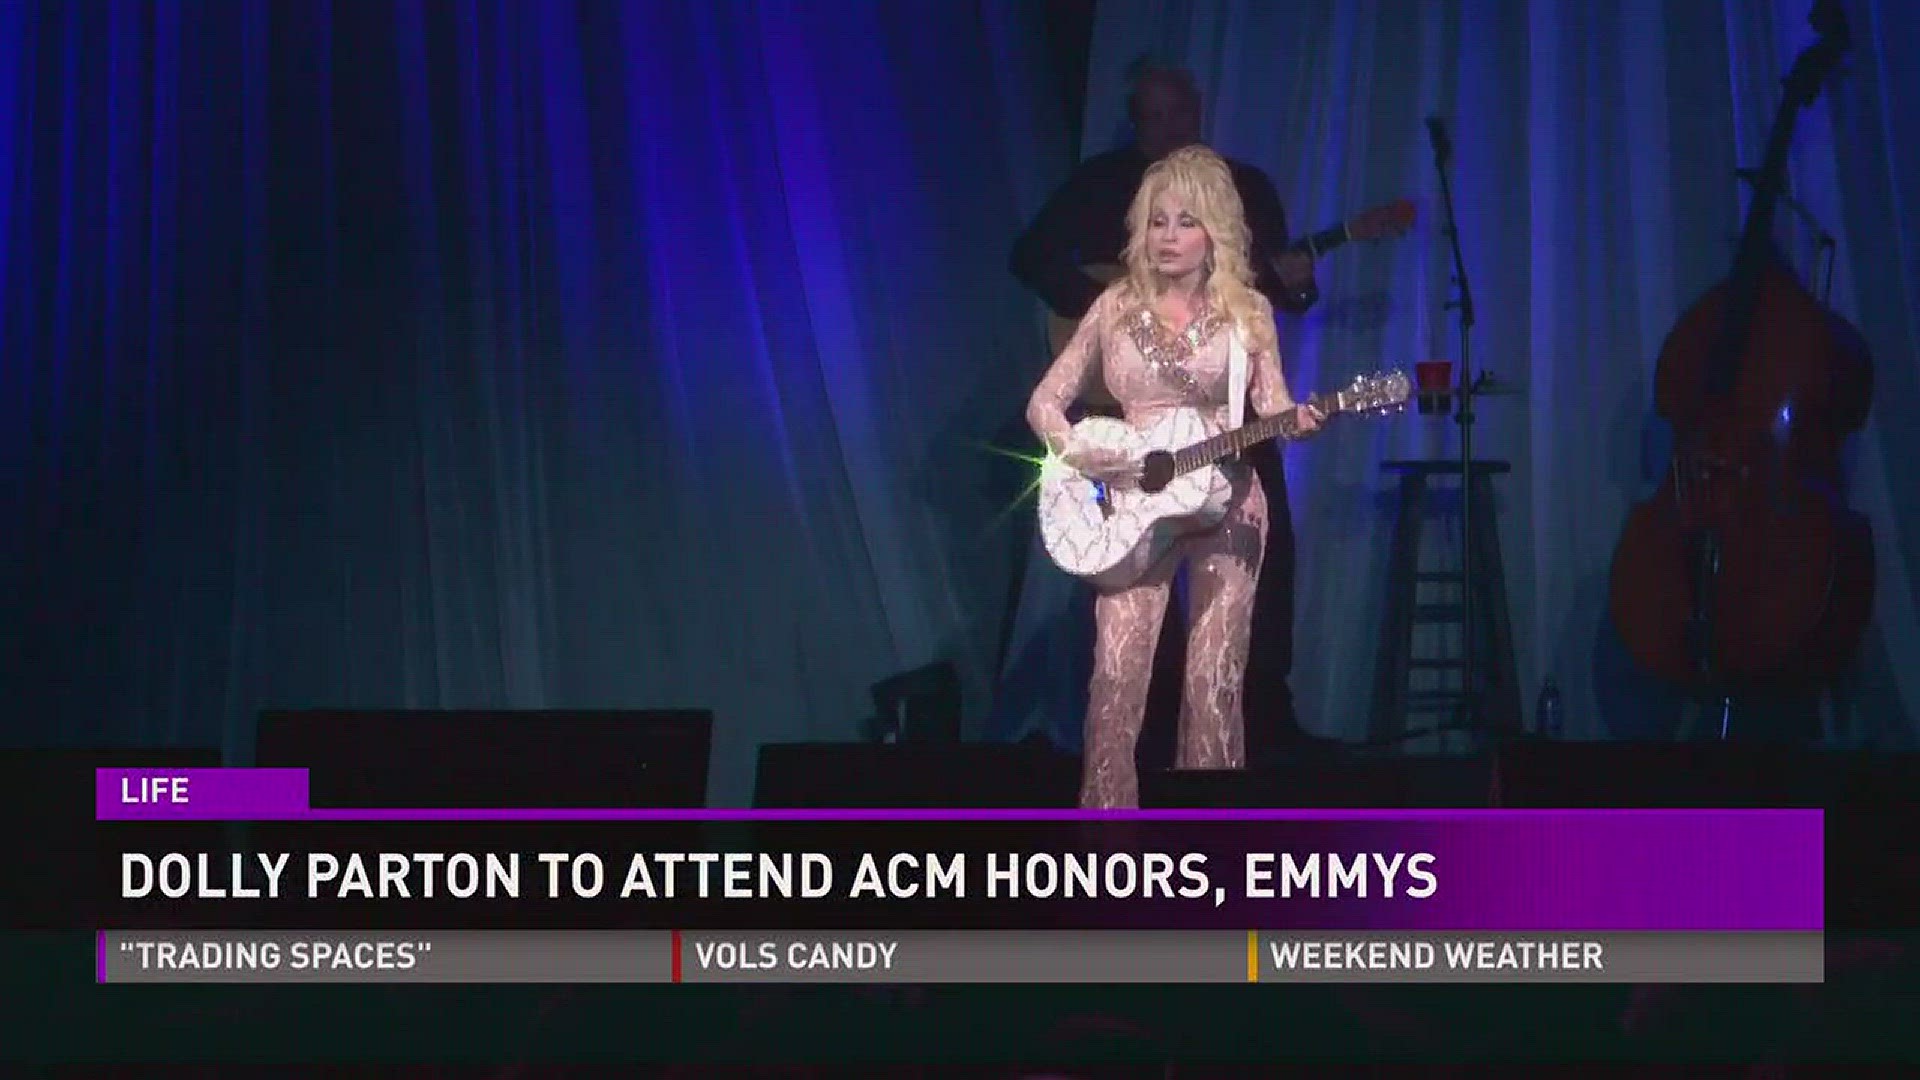 The Sevier County native will make a TV appearance tomorrow on the ACM Honors where she'll accept an award. Two days later...she'll be at the Primetime Emmy awards.